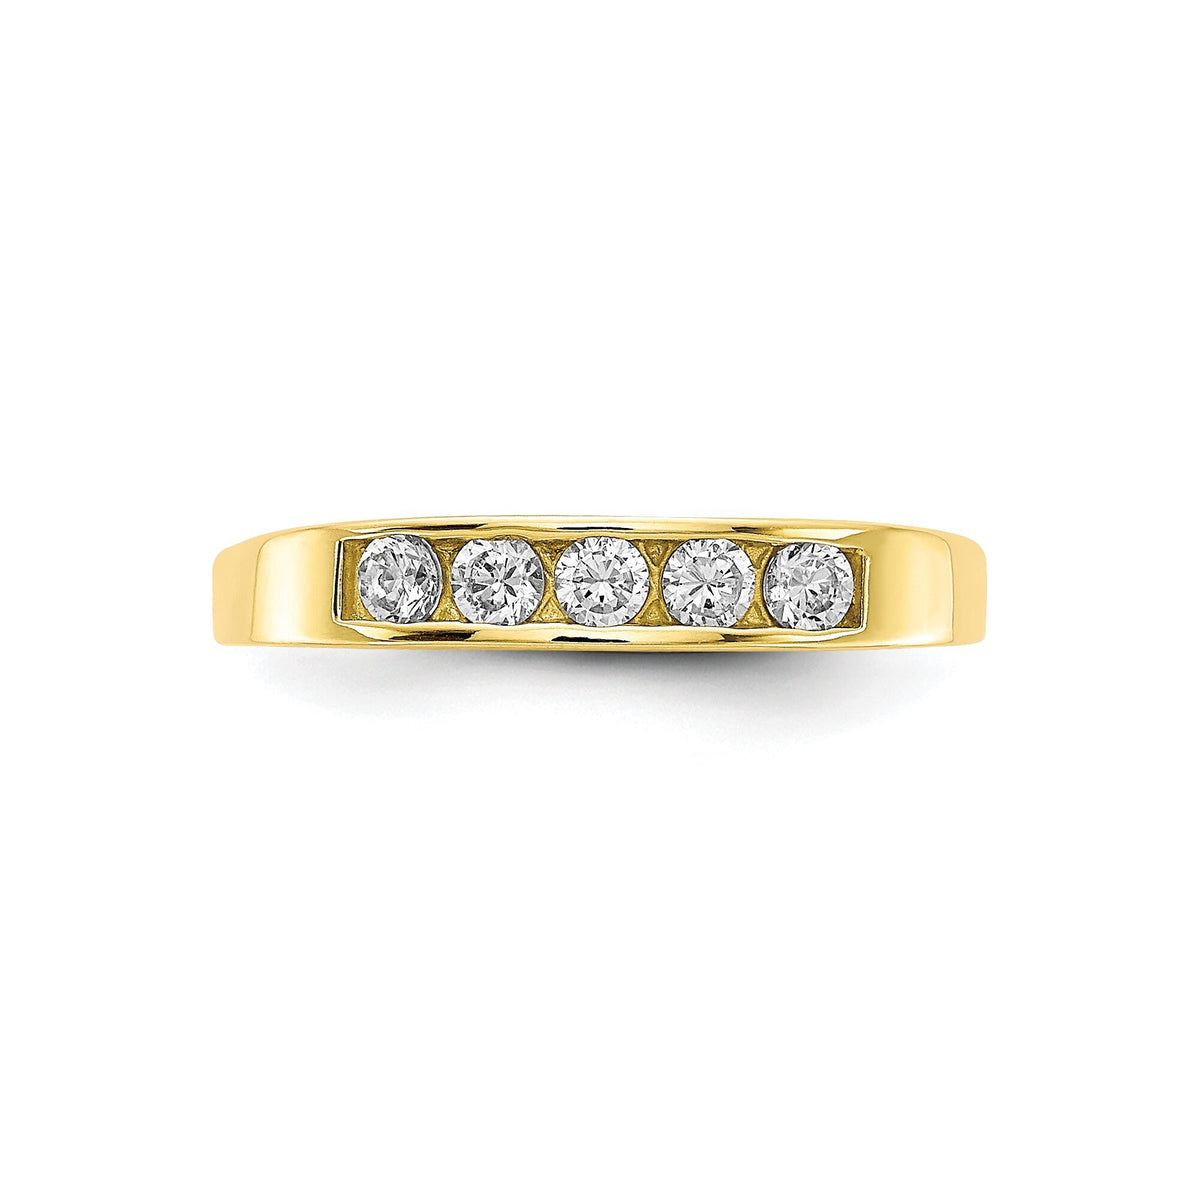 10k Yellow Gold CZ Ring Baby to Toddler Band Size 1- 5 (1-7 year olds) Baby to Toddler Size Children's CZ Ring Band Small Adult Size